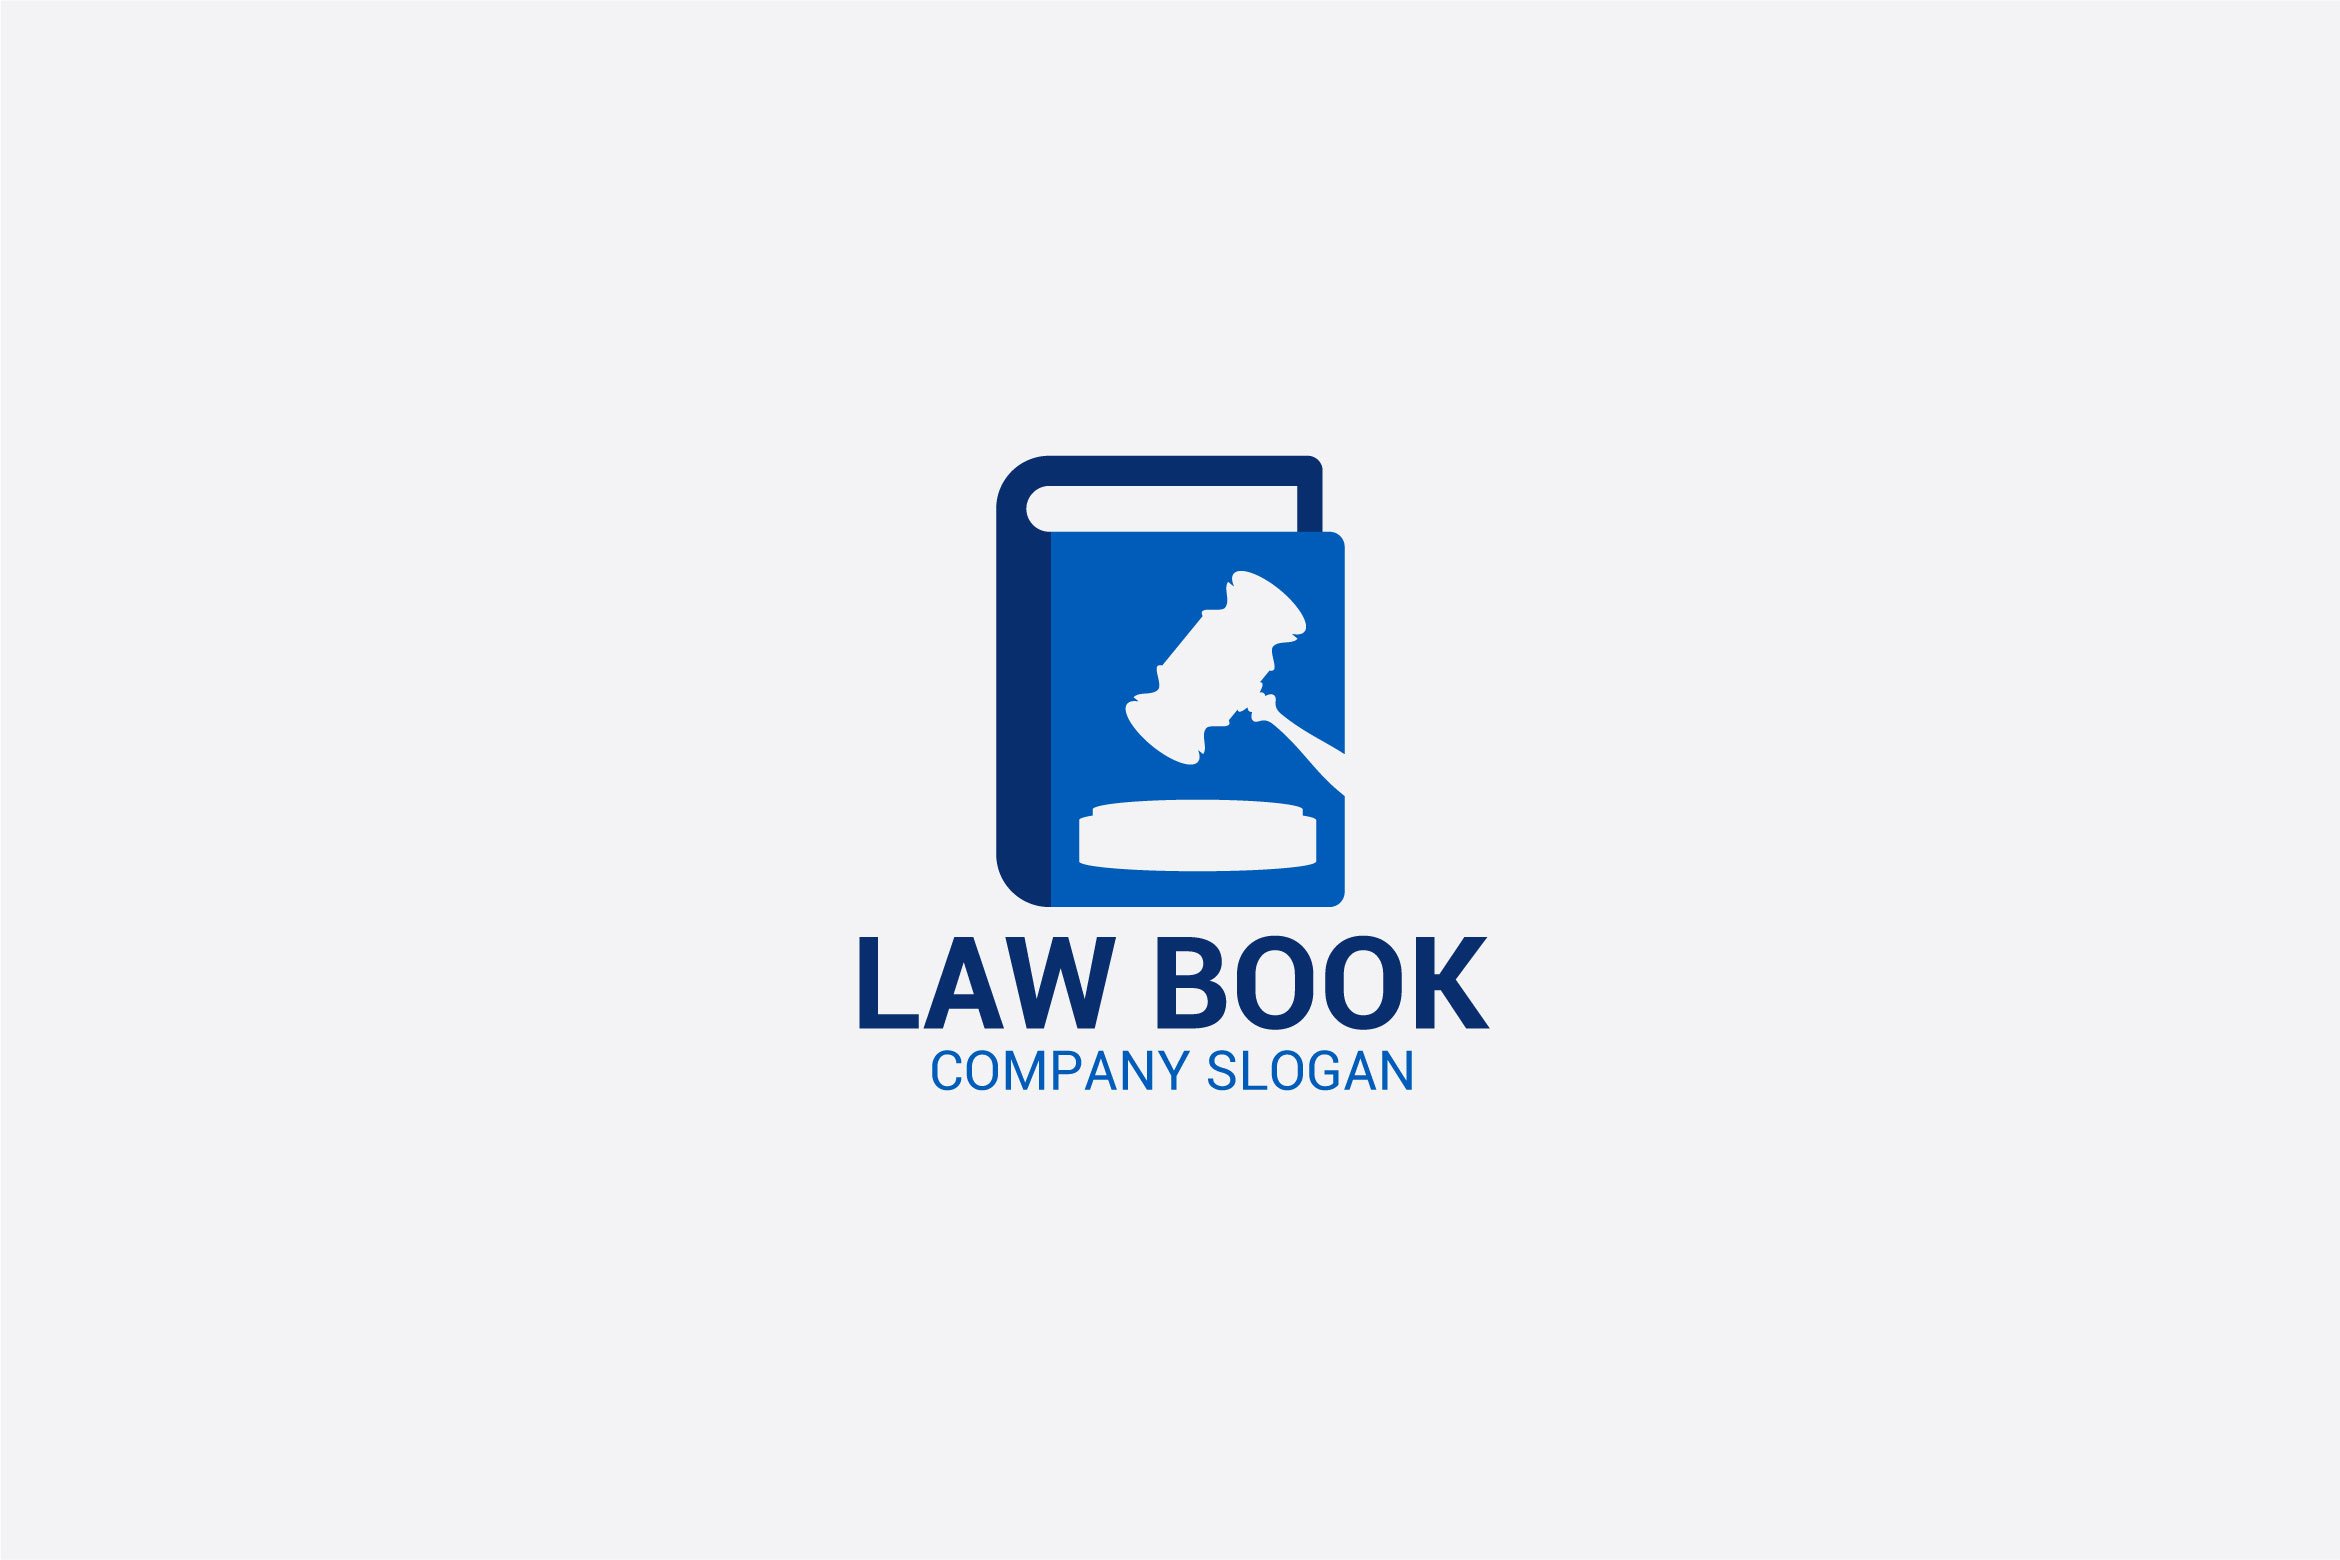 White background with a blue book logo.